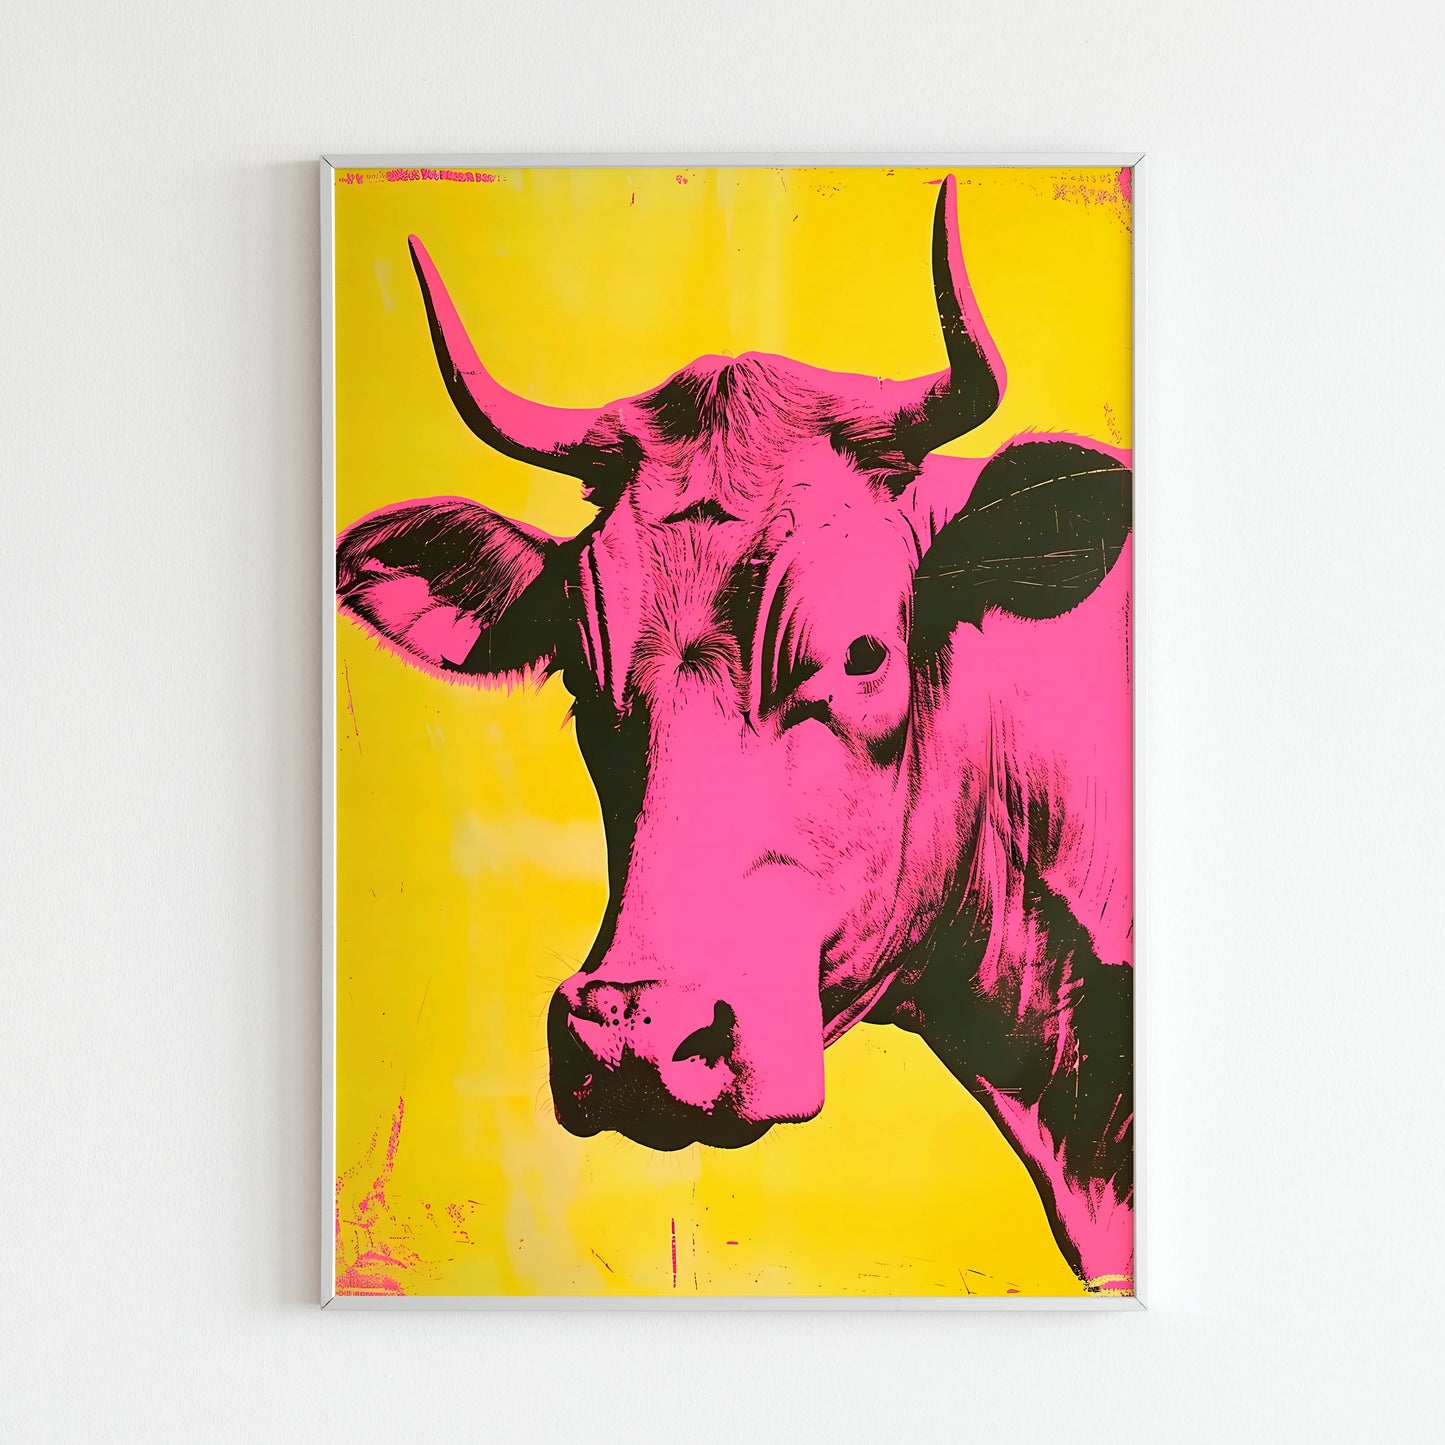 Embrace the playful charm of a pink cow with this pop art-inspired poster (physical or digital).